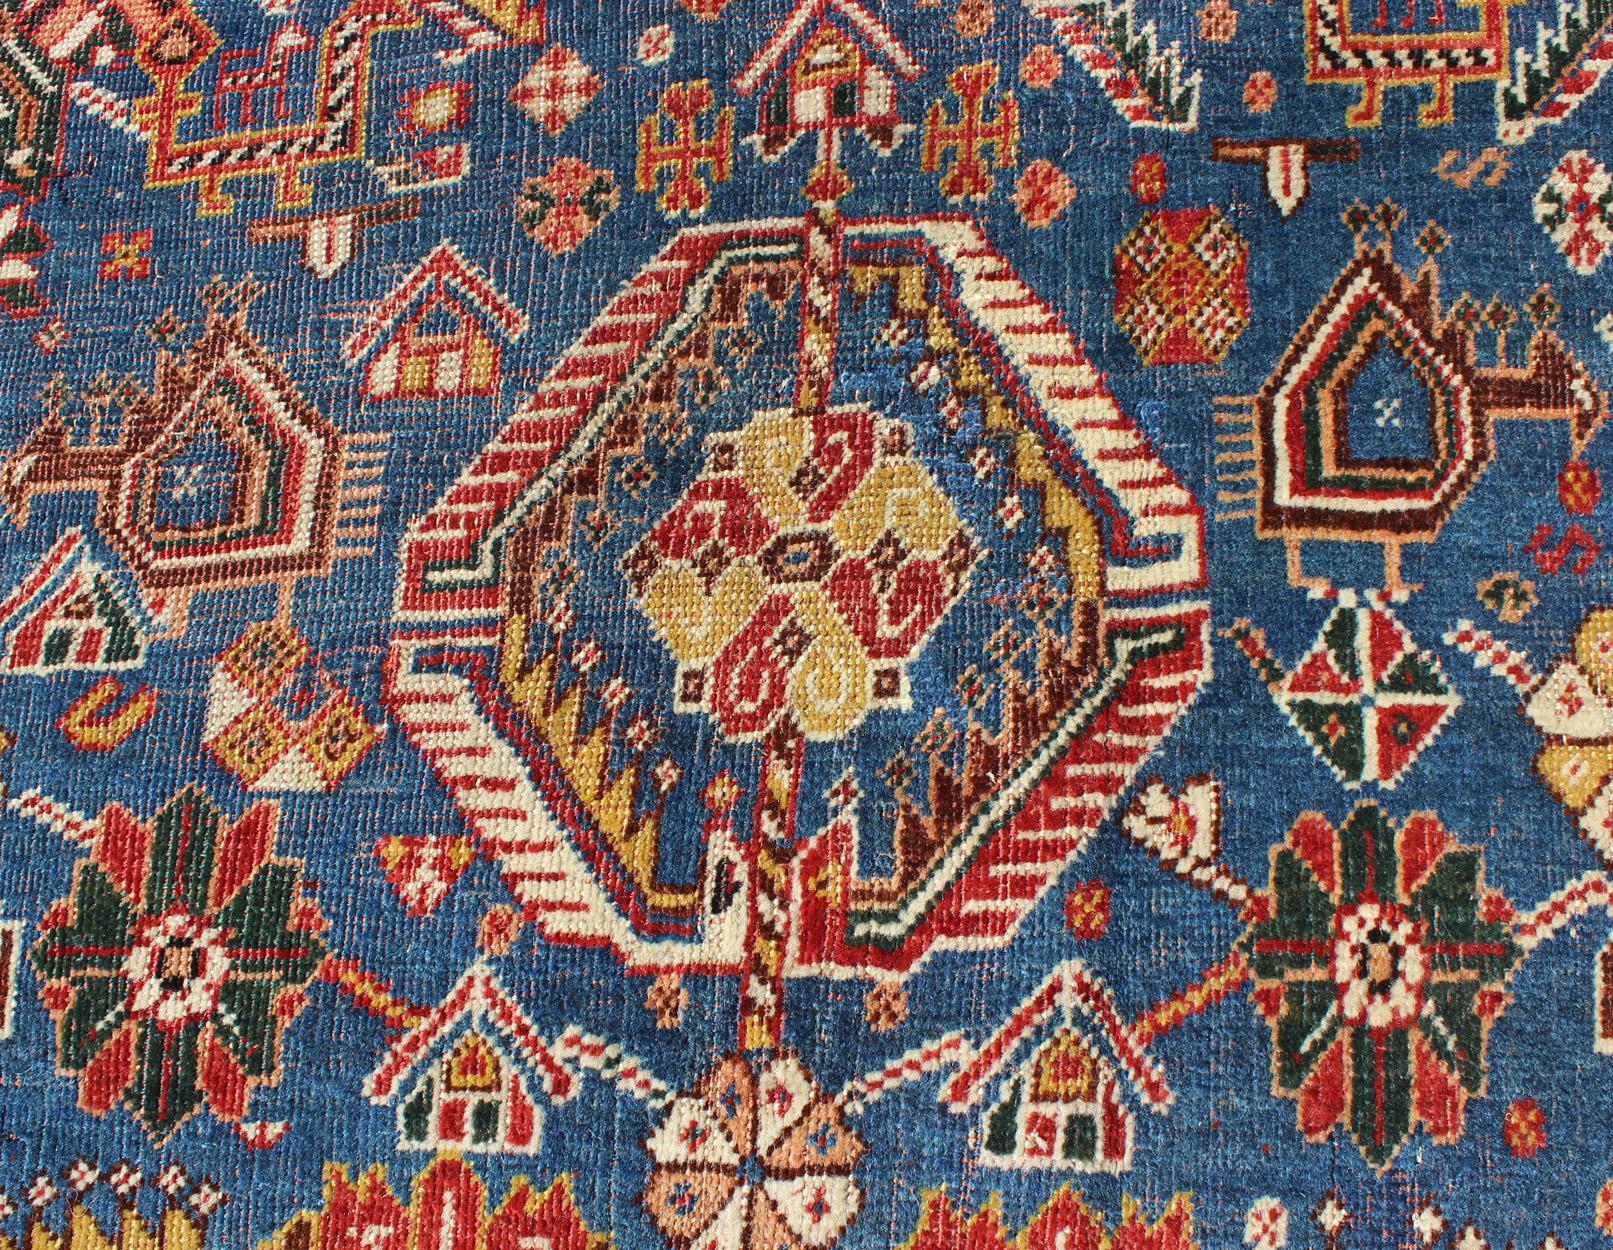 Antique Persian Qashqai Rug with Medallion Design in Rich Colors, Blue and Red 3